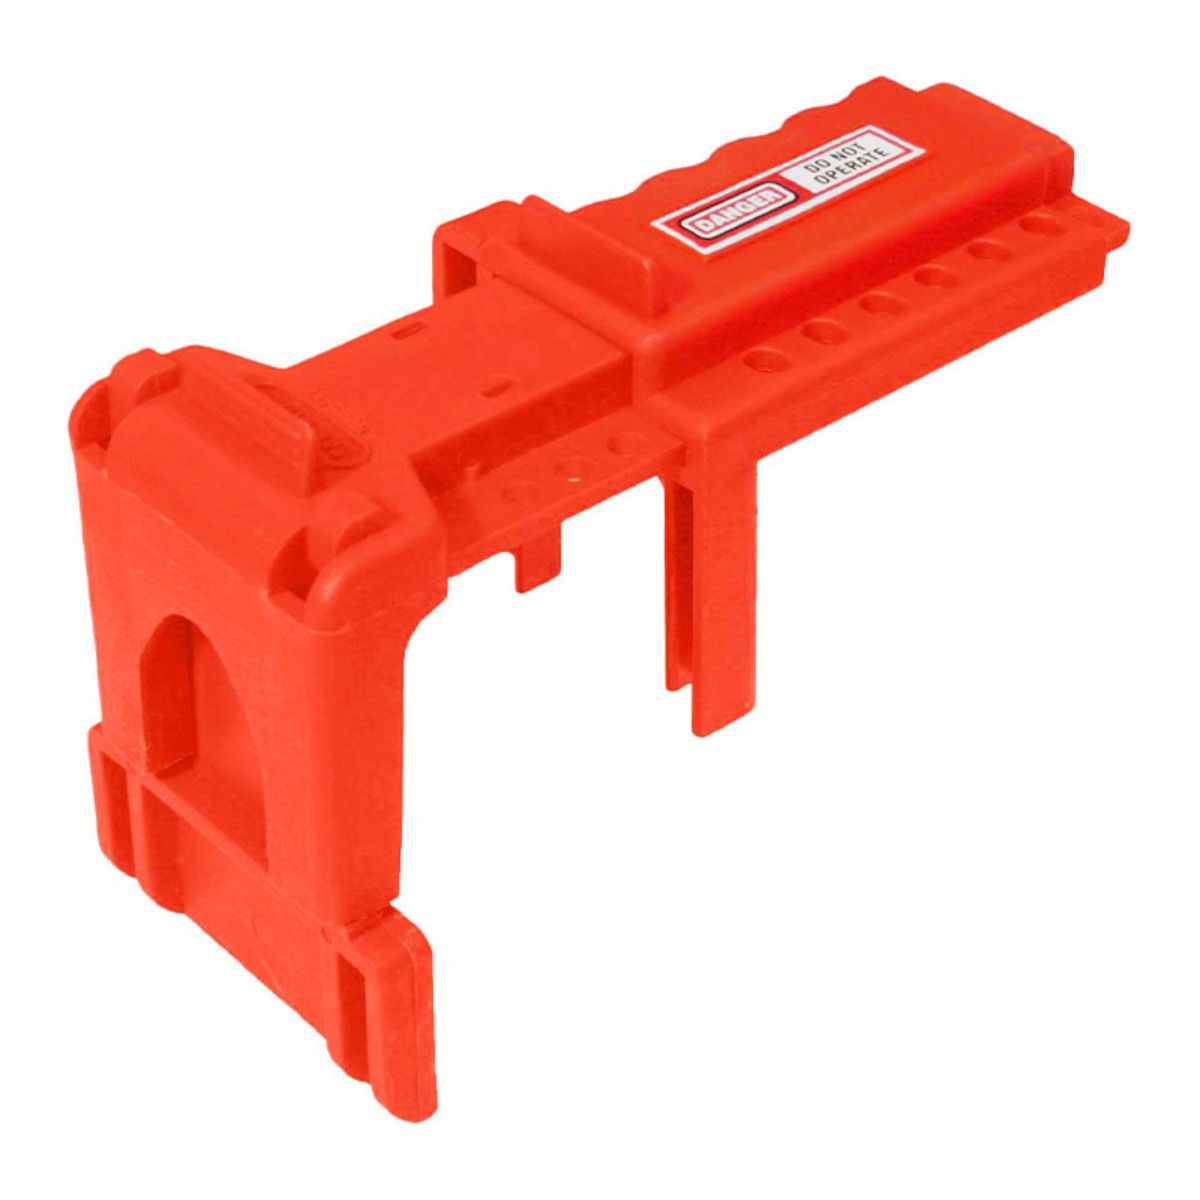 Ball Valve Lockout Covers | Valve Lever Lockout